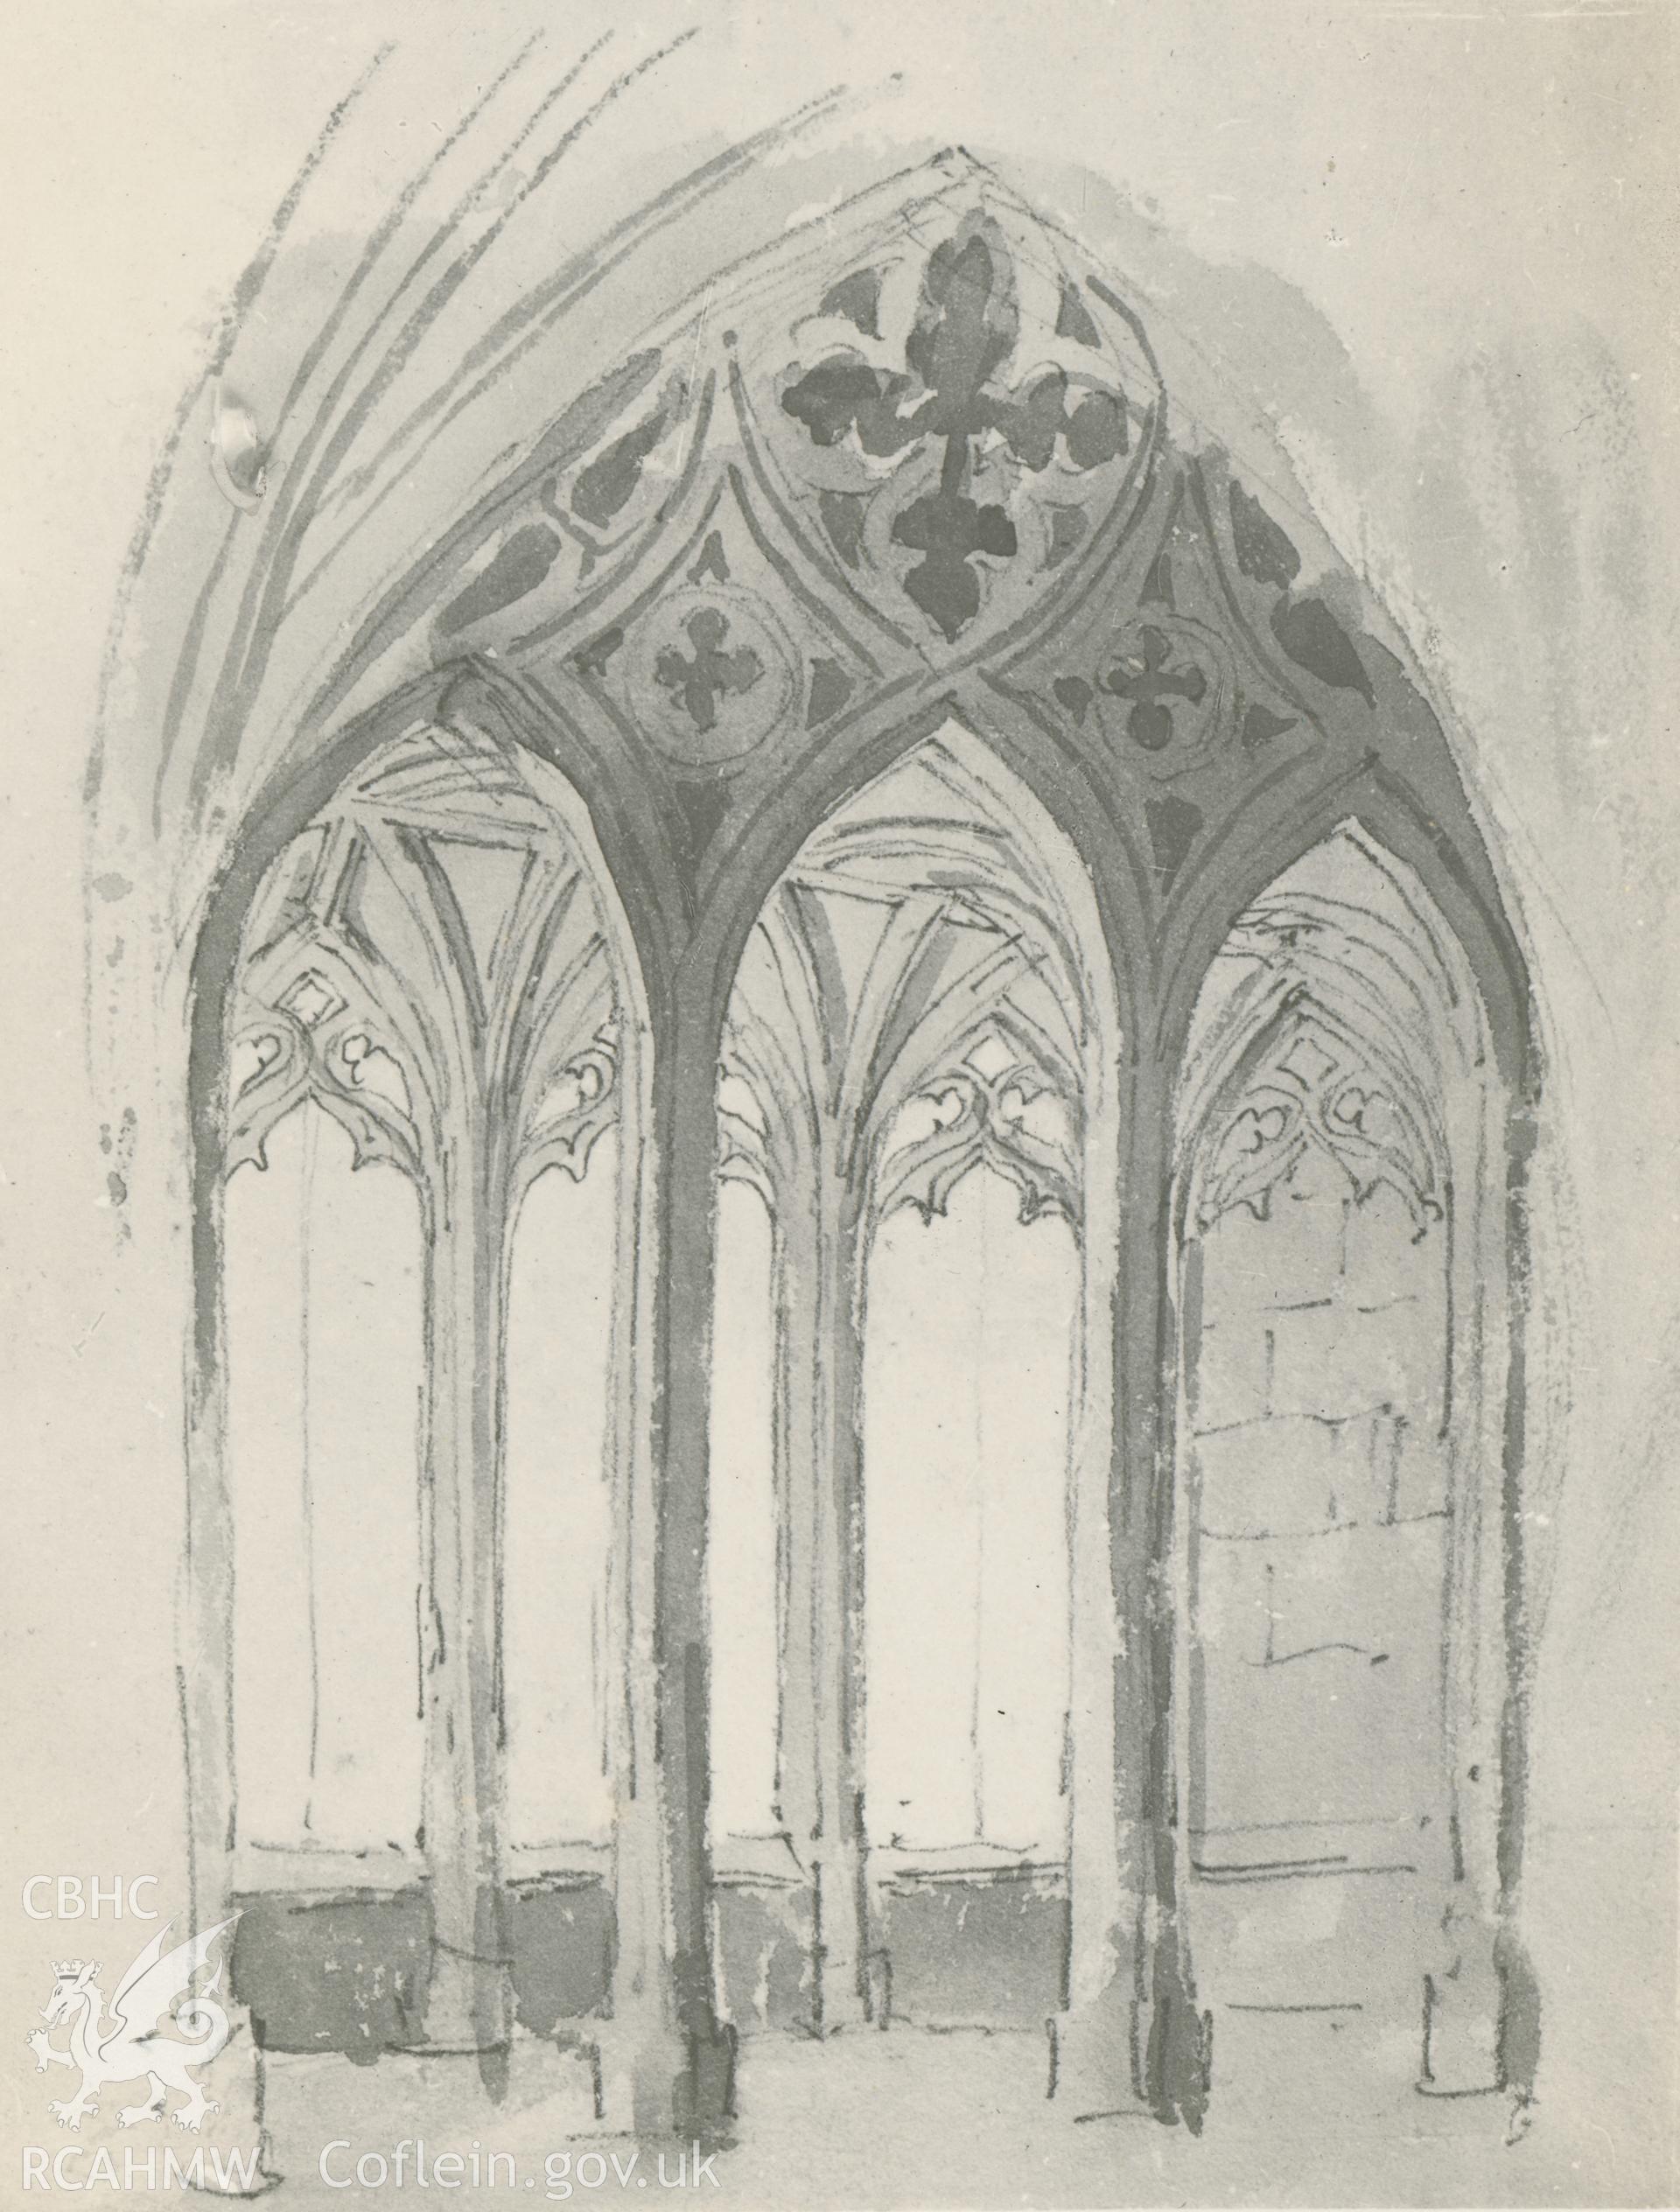 Photograph by Macbeth of an early pencil sketch showing detail of window at Valle Crucis Abbey.